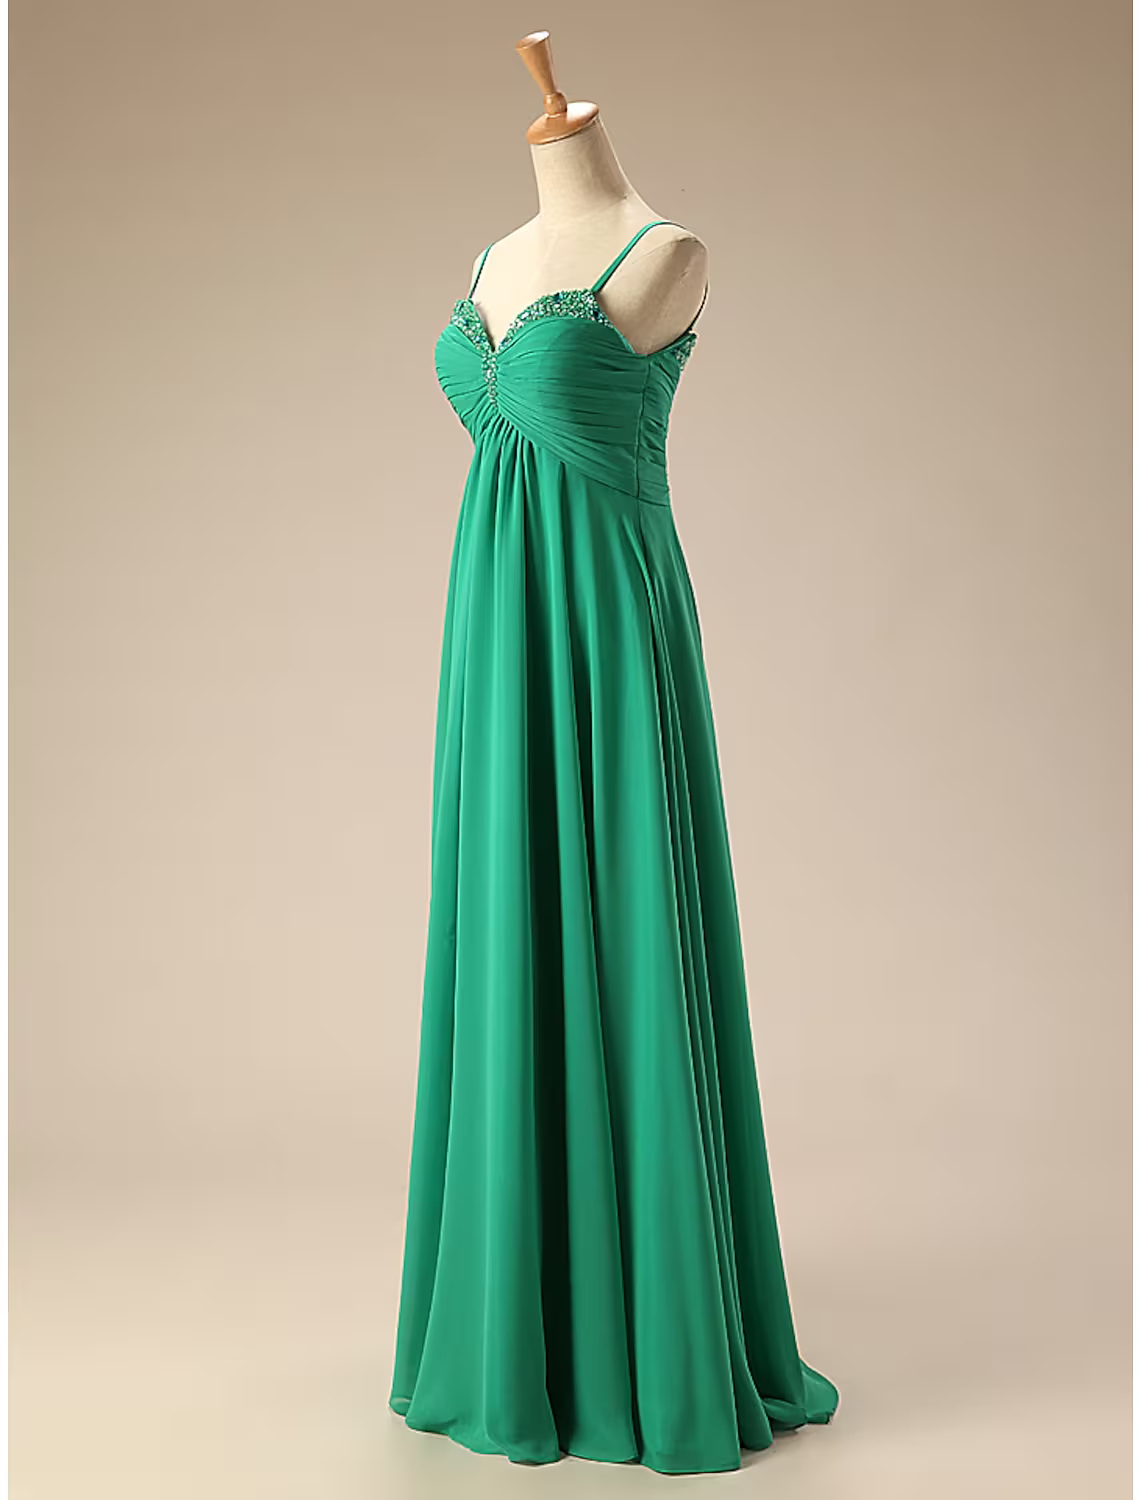 A-Line Prom Dresses Dress Formal Floor Length Sleeveless Sweetheart Chiffon Backless with Pleats Ruched Beading